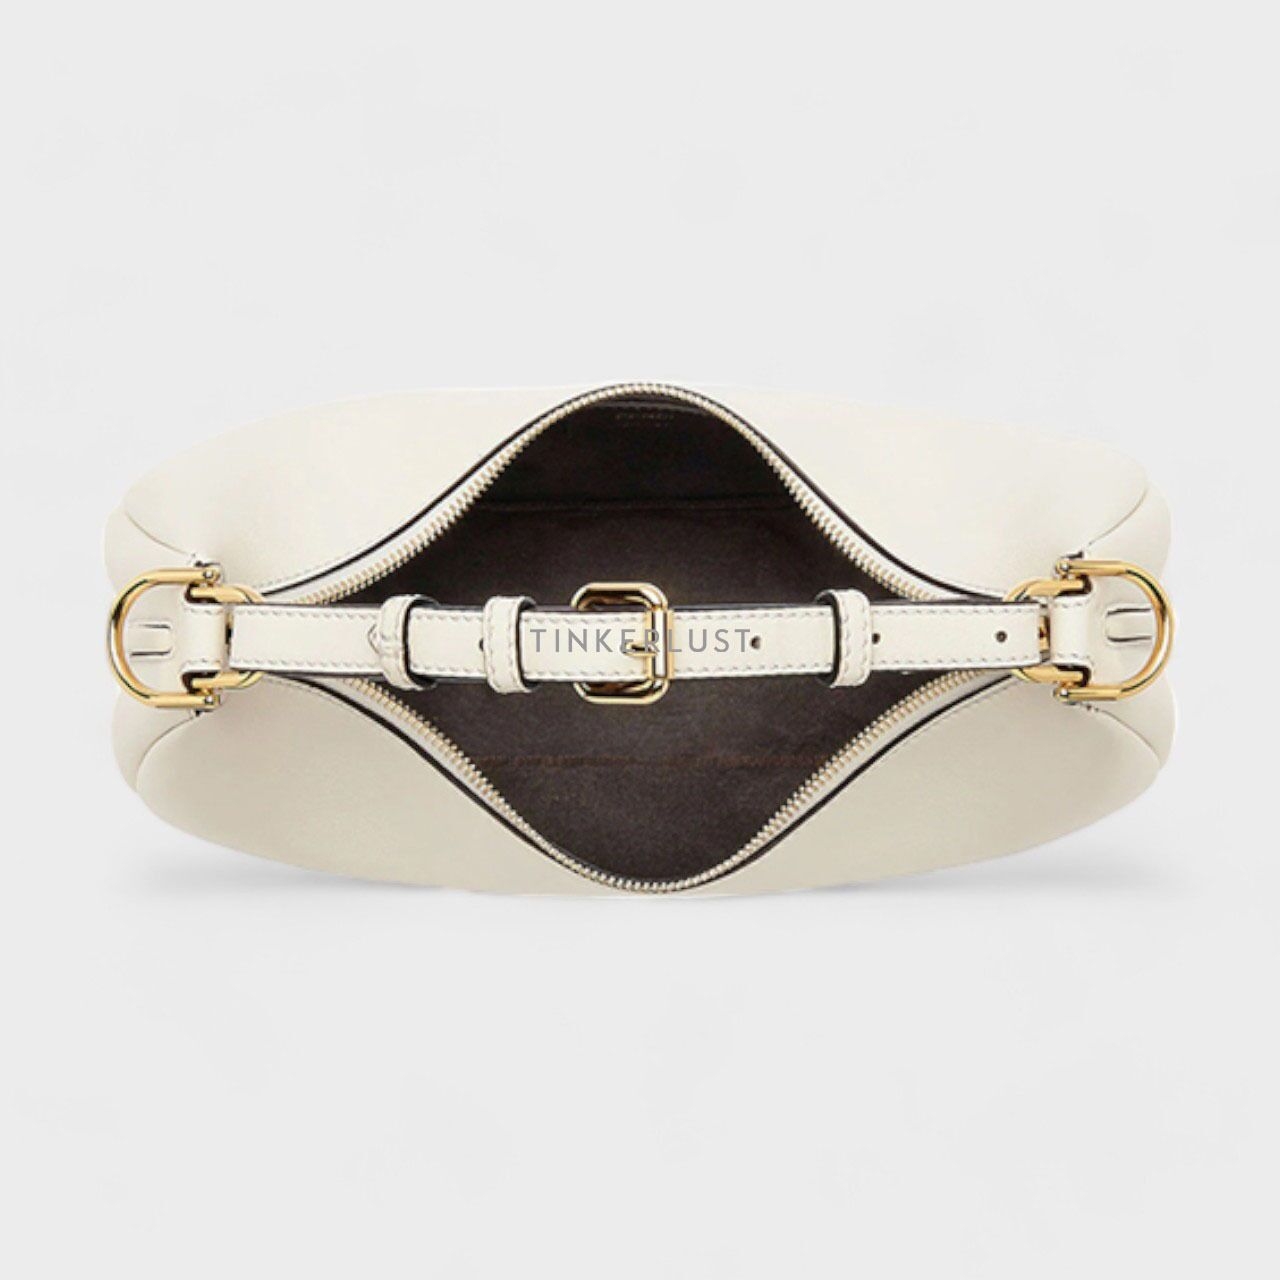 Fendi Small Fendigraphy in White Calf Leather Shoulder Bag